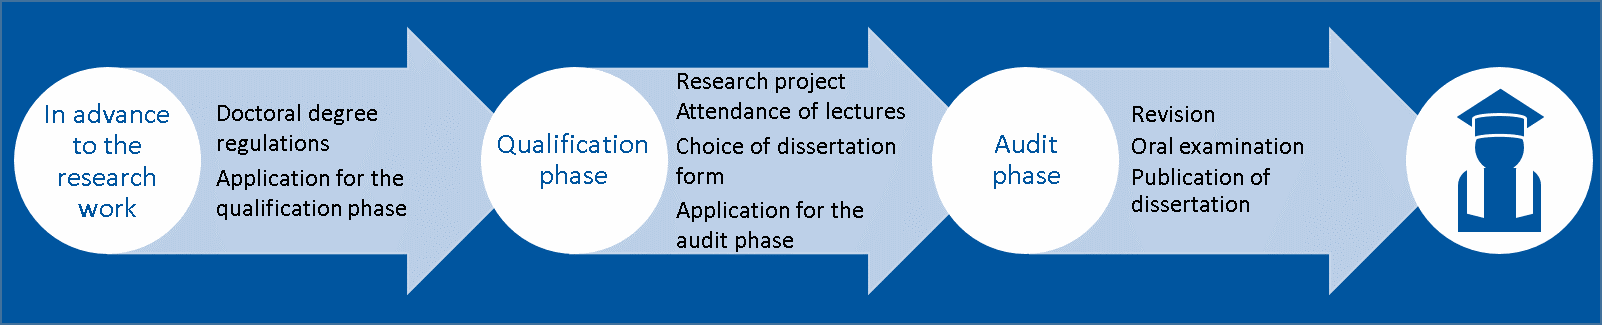 Overview of the process to obtain a PhD degree